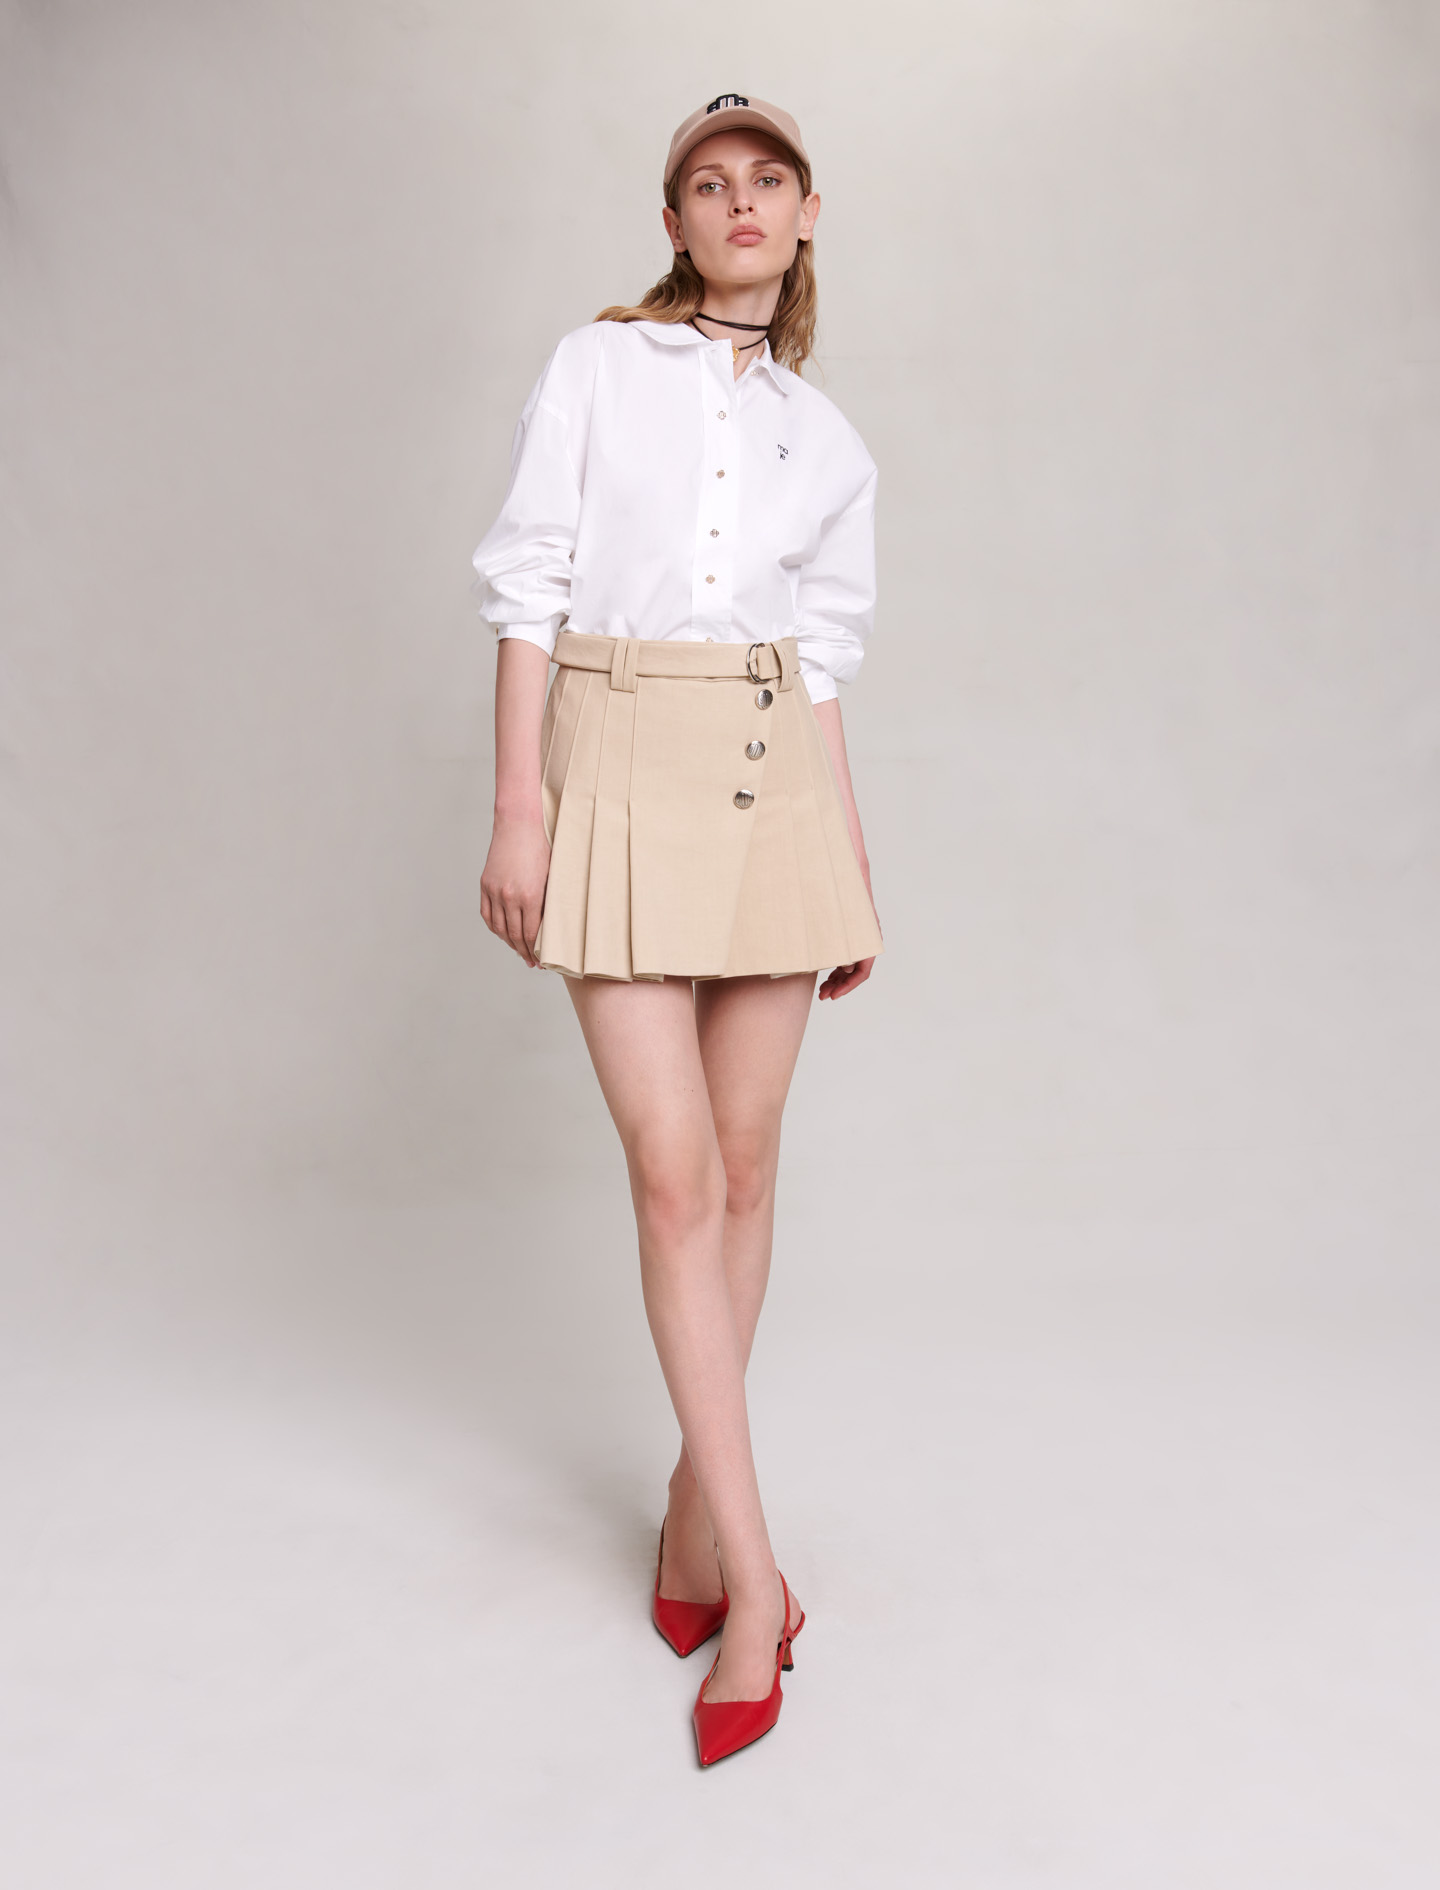 Maje Woman's cotton Pocket lining: Pleated mini-skirt for Fall/Winter, in color Beige / Beige